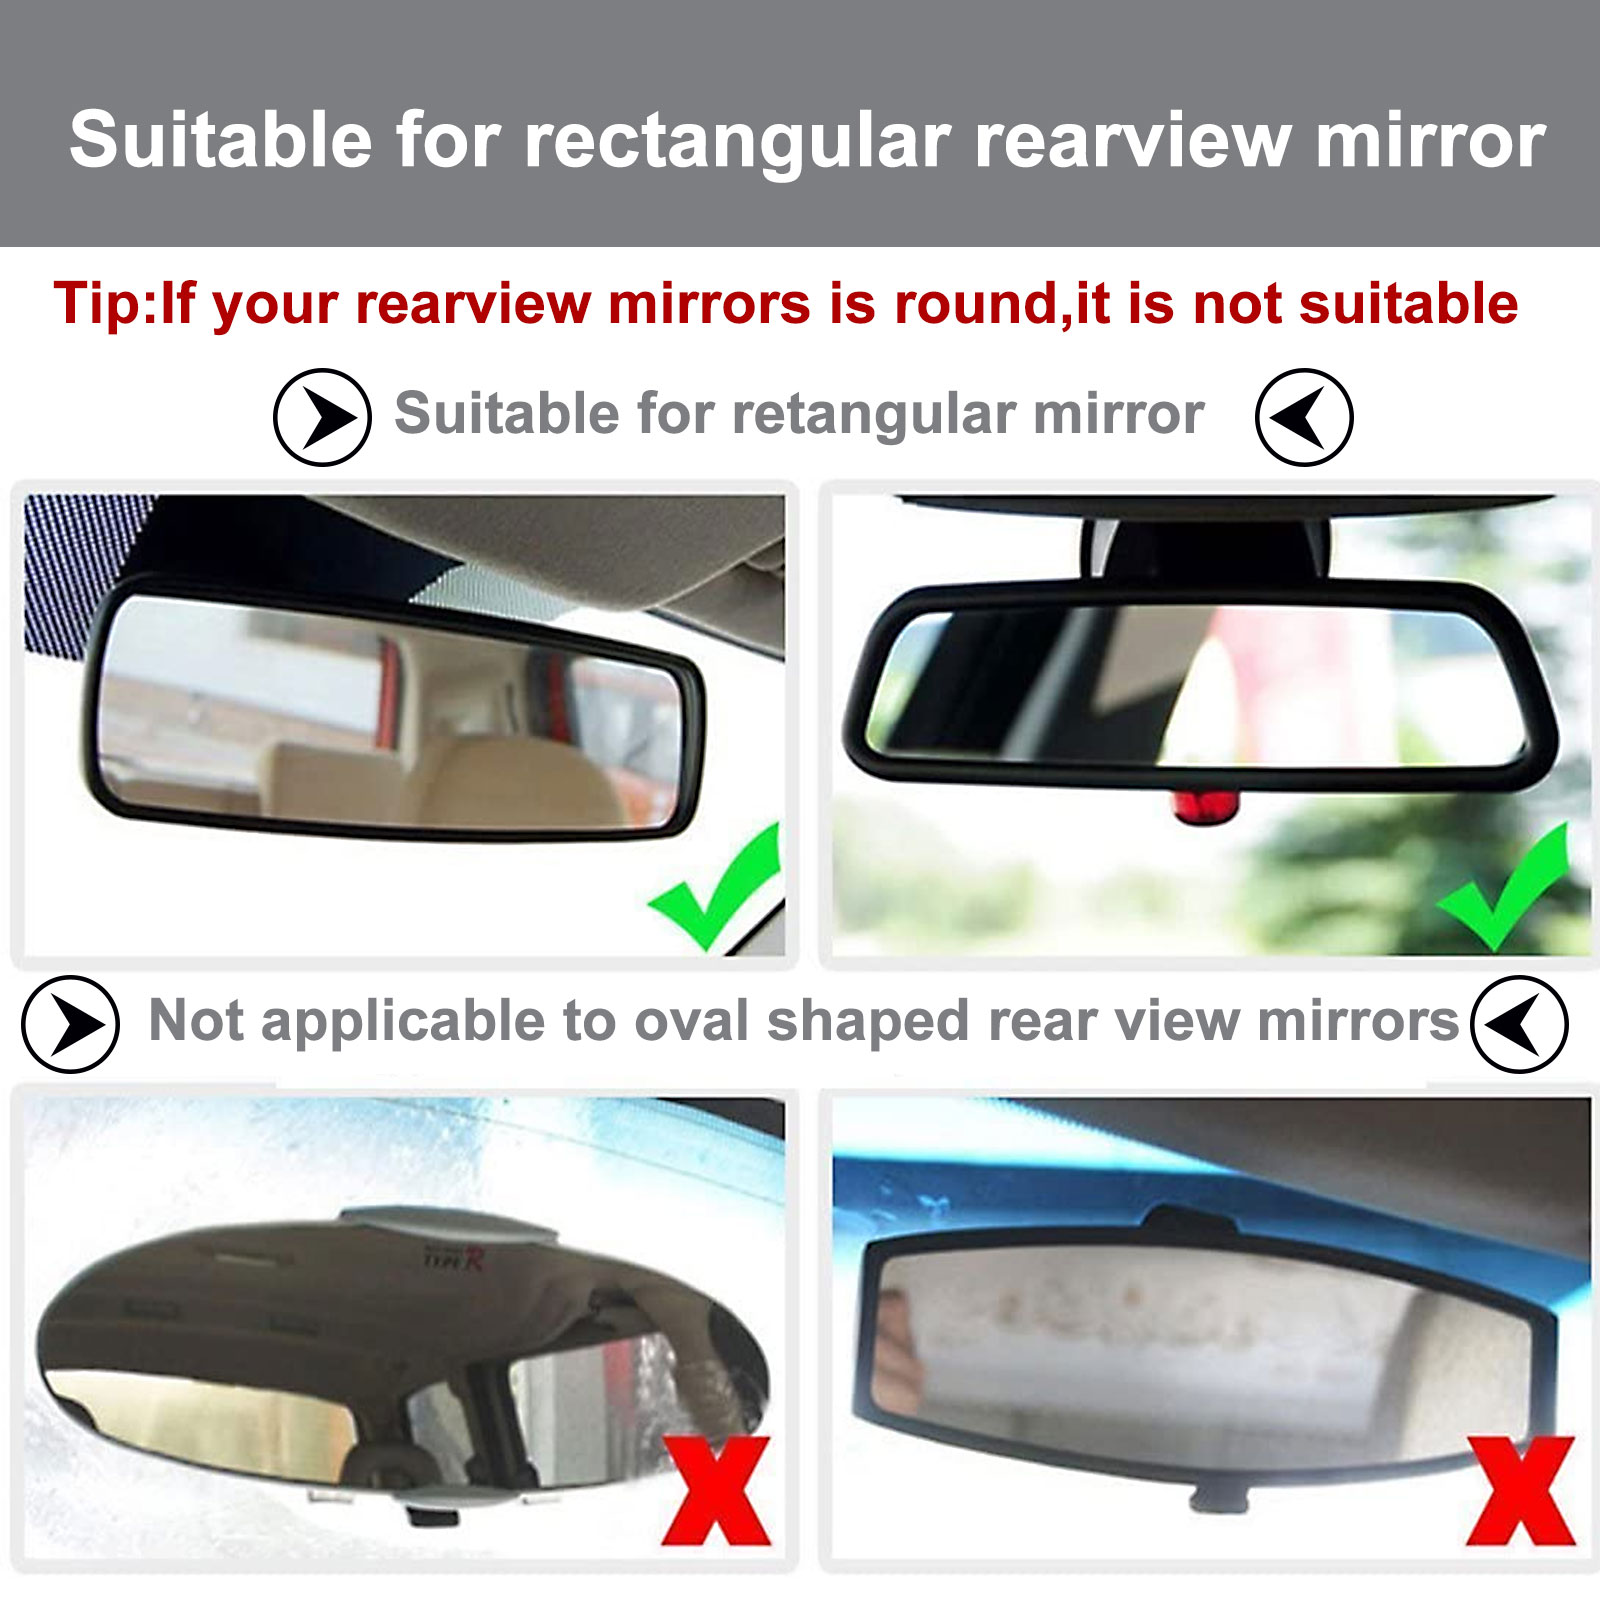 TSV Car Rear View Mirror Mount Grip Clip, 240 Rotation Car Mount Holder, Universal Smartphone Holders Cell Phone Mount Fit for iPhone 13/12/11 Pro Xr Xs Max X, Samsung S21/Galaxy, HTC, GPS, Smartphone - image 5 of 9